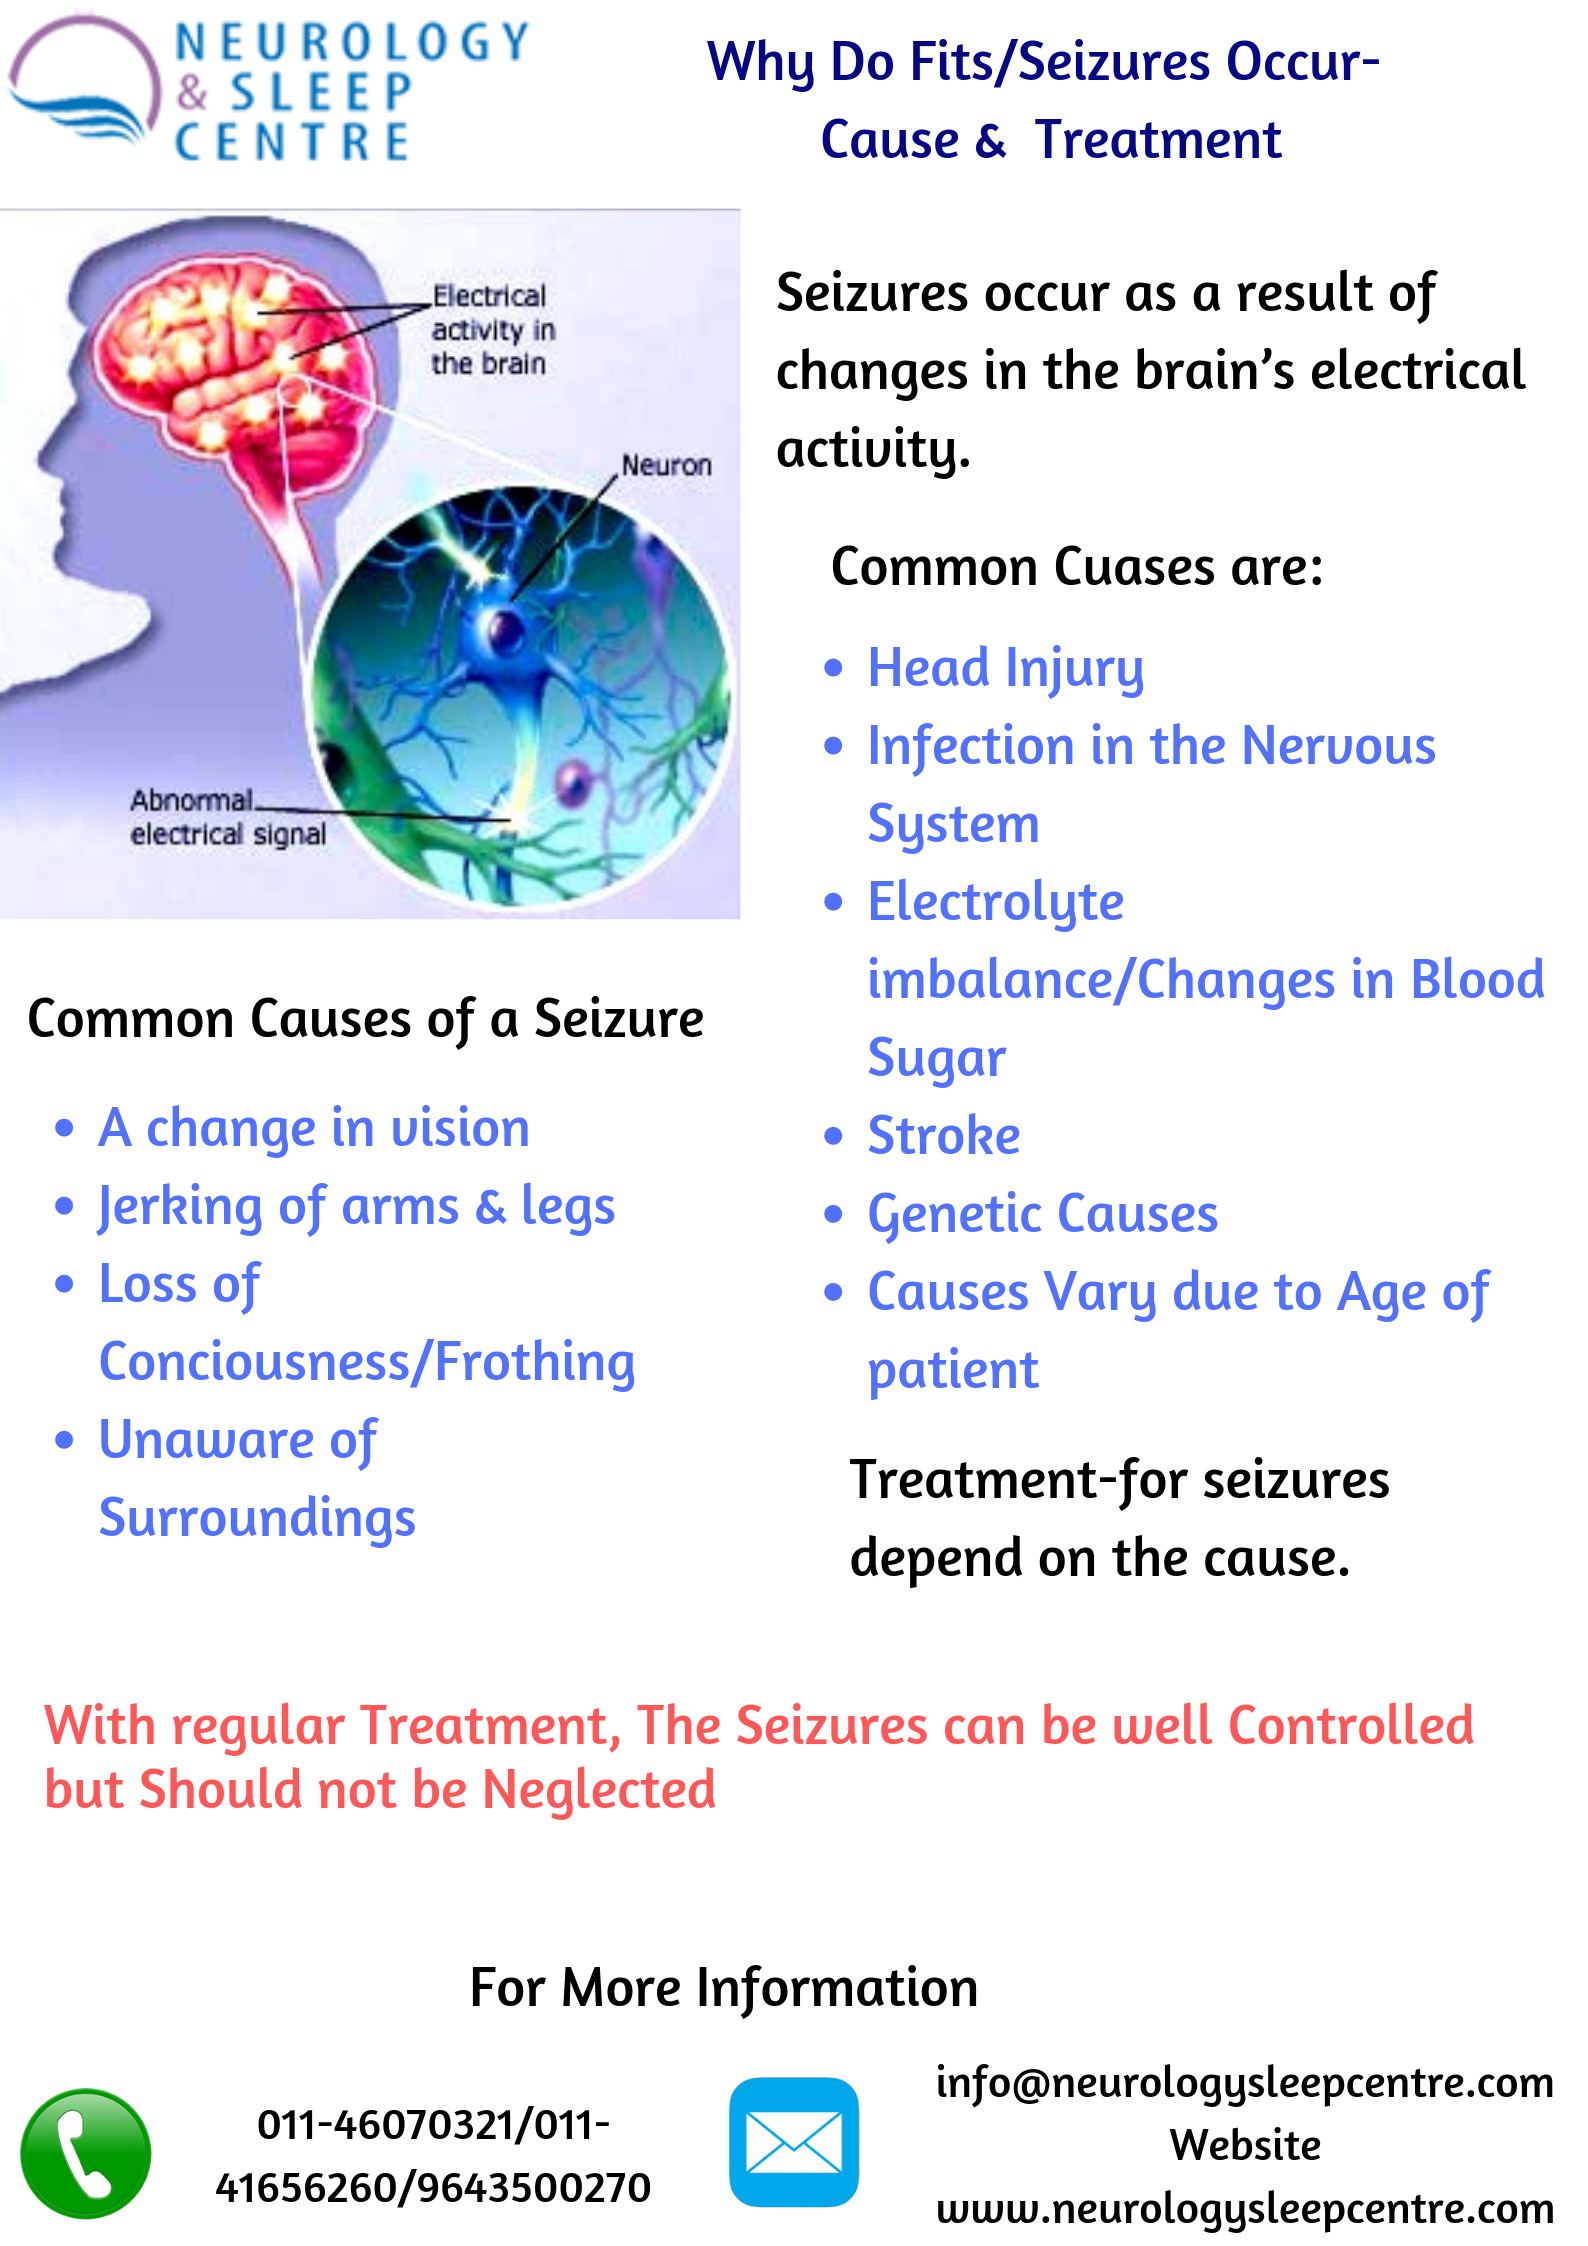 Why Do Fits/Seizure Occurs